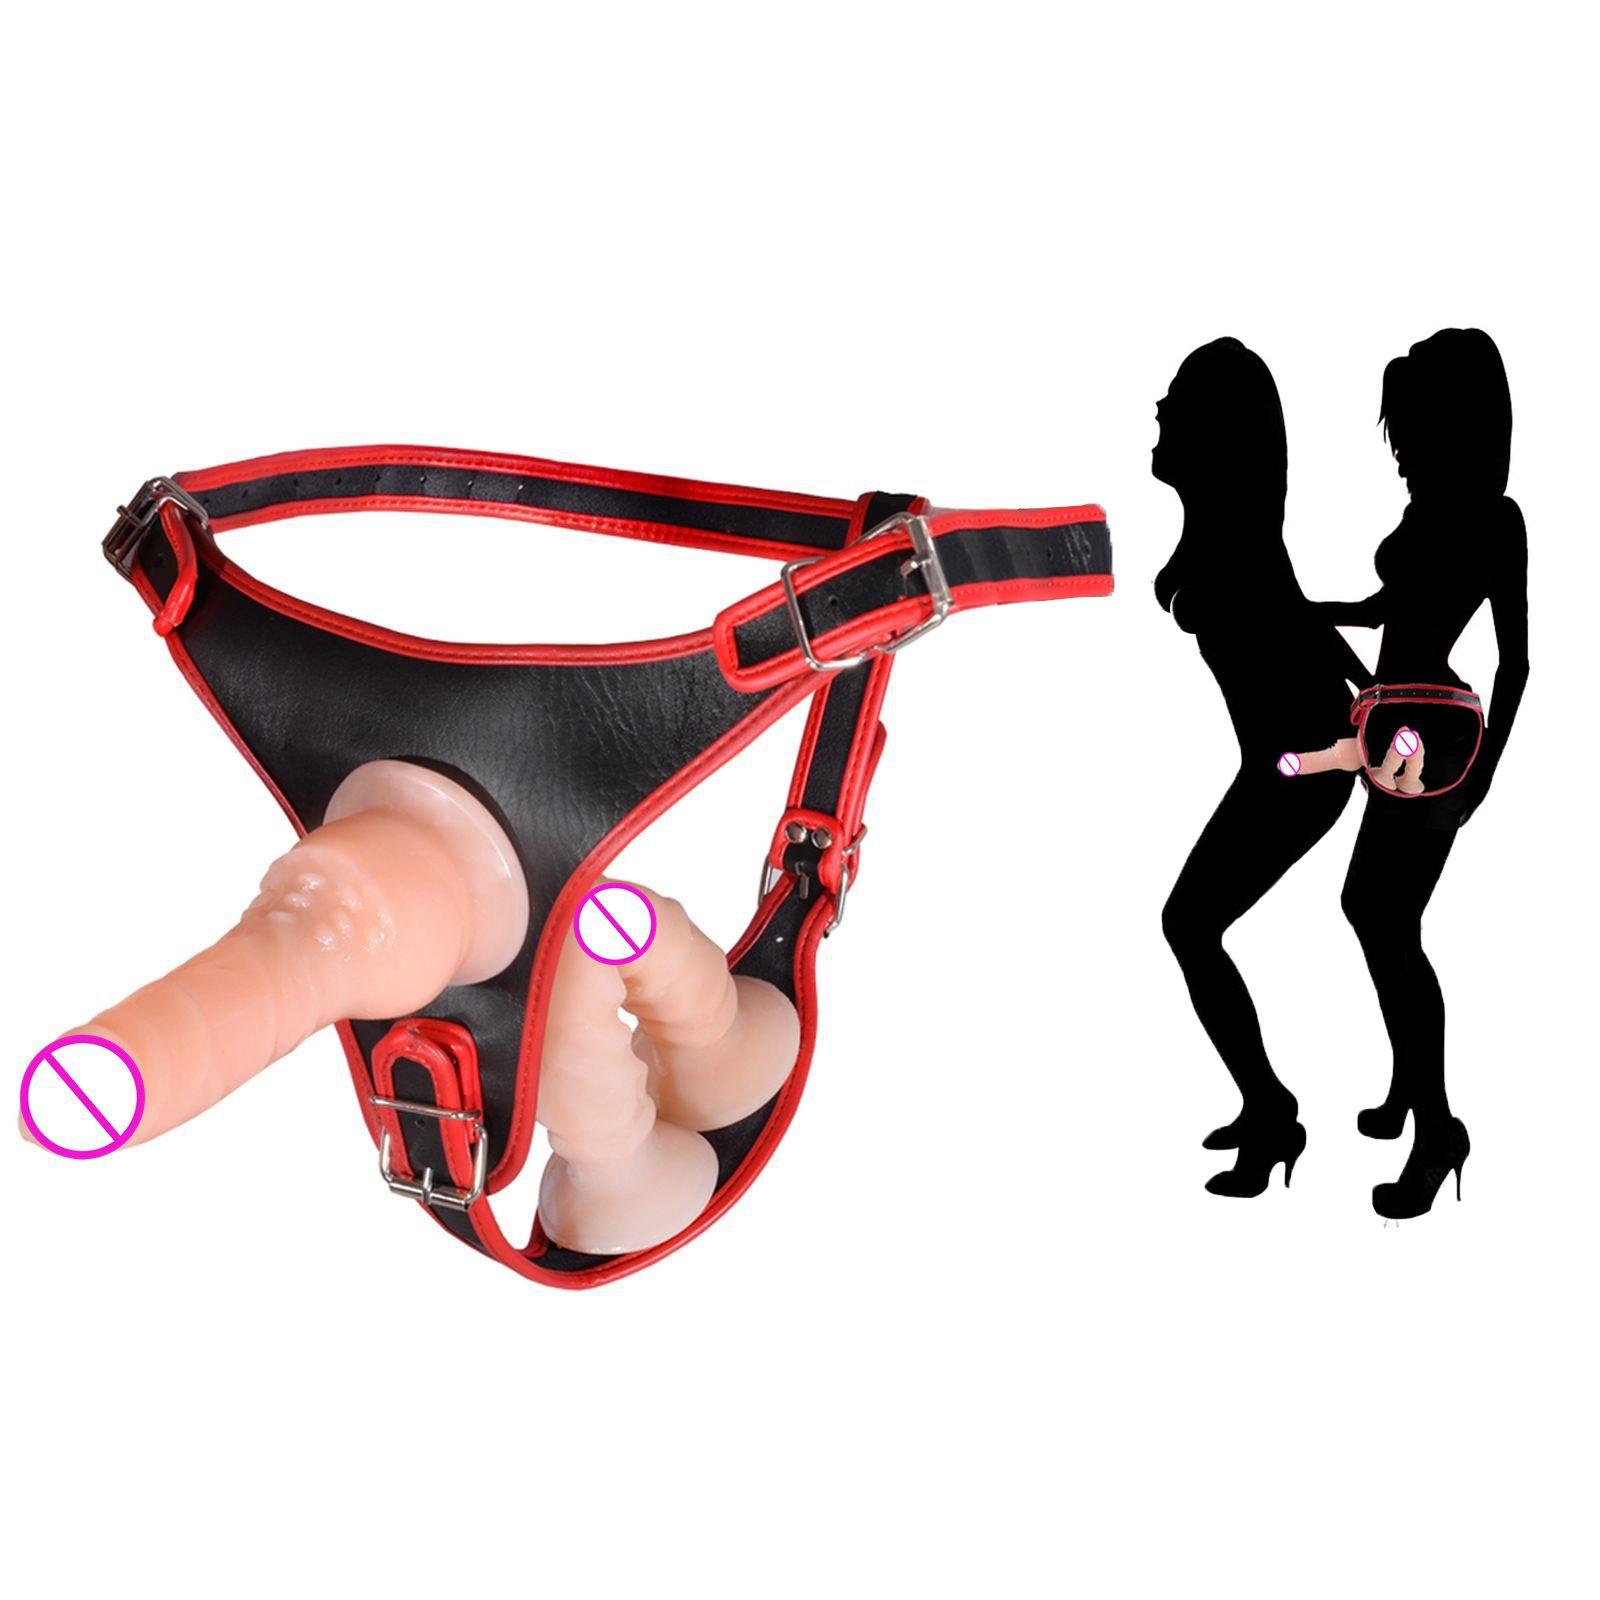 Bundled Three Head Strap On Dildo Wearable Harness Panties Removeable Lesbian Dildo Vagina +anal Sex Toys For Women Lesbian